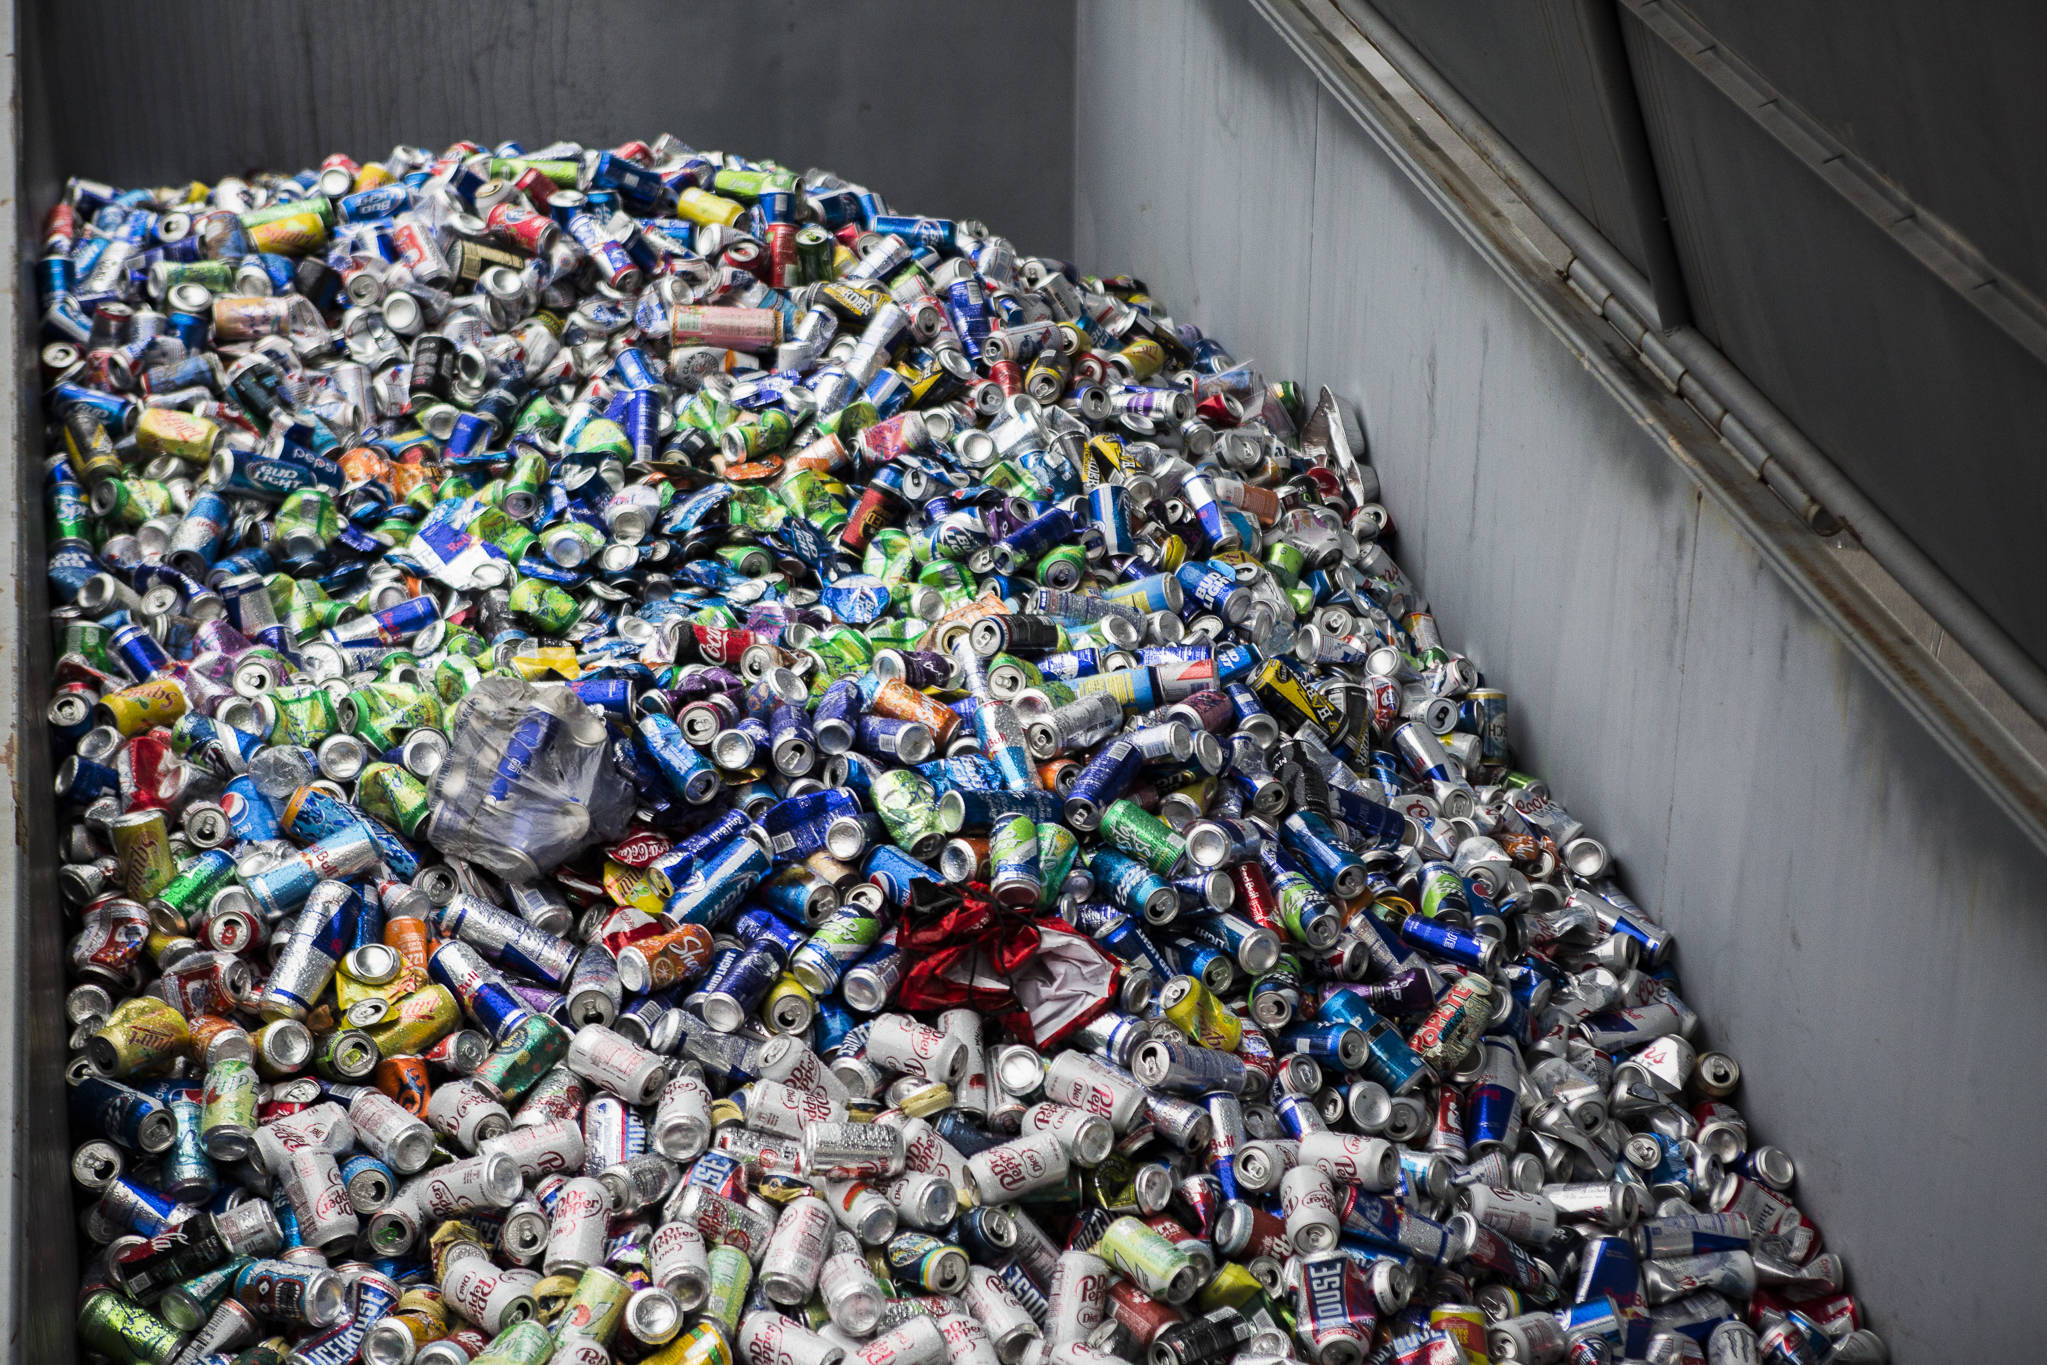 Aluminum cans fill a large recycling container at the Airport Road Recycling & Transfer Station on Nov. 24 in Everett. Photo by Olivia Vanni/The Herald (Everett)